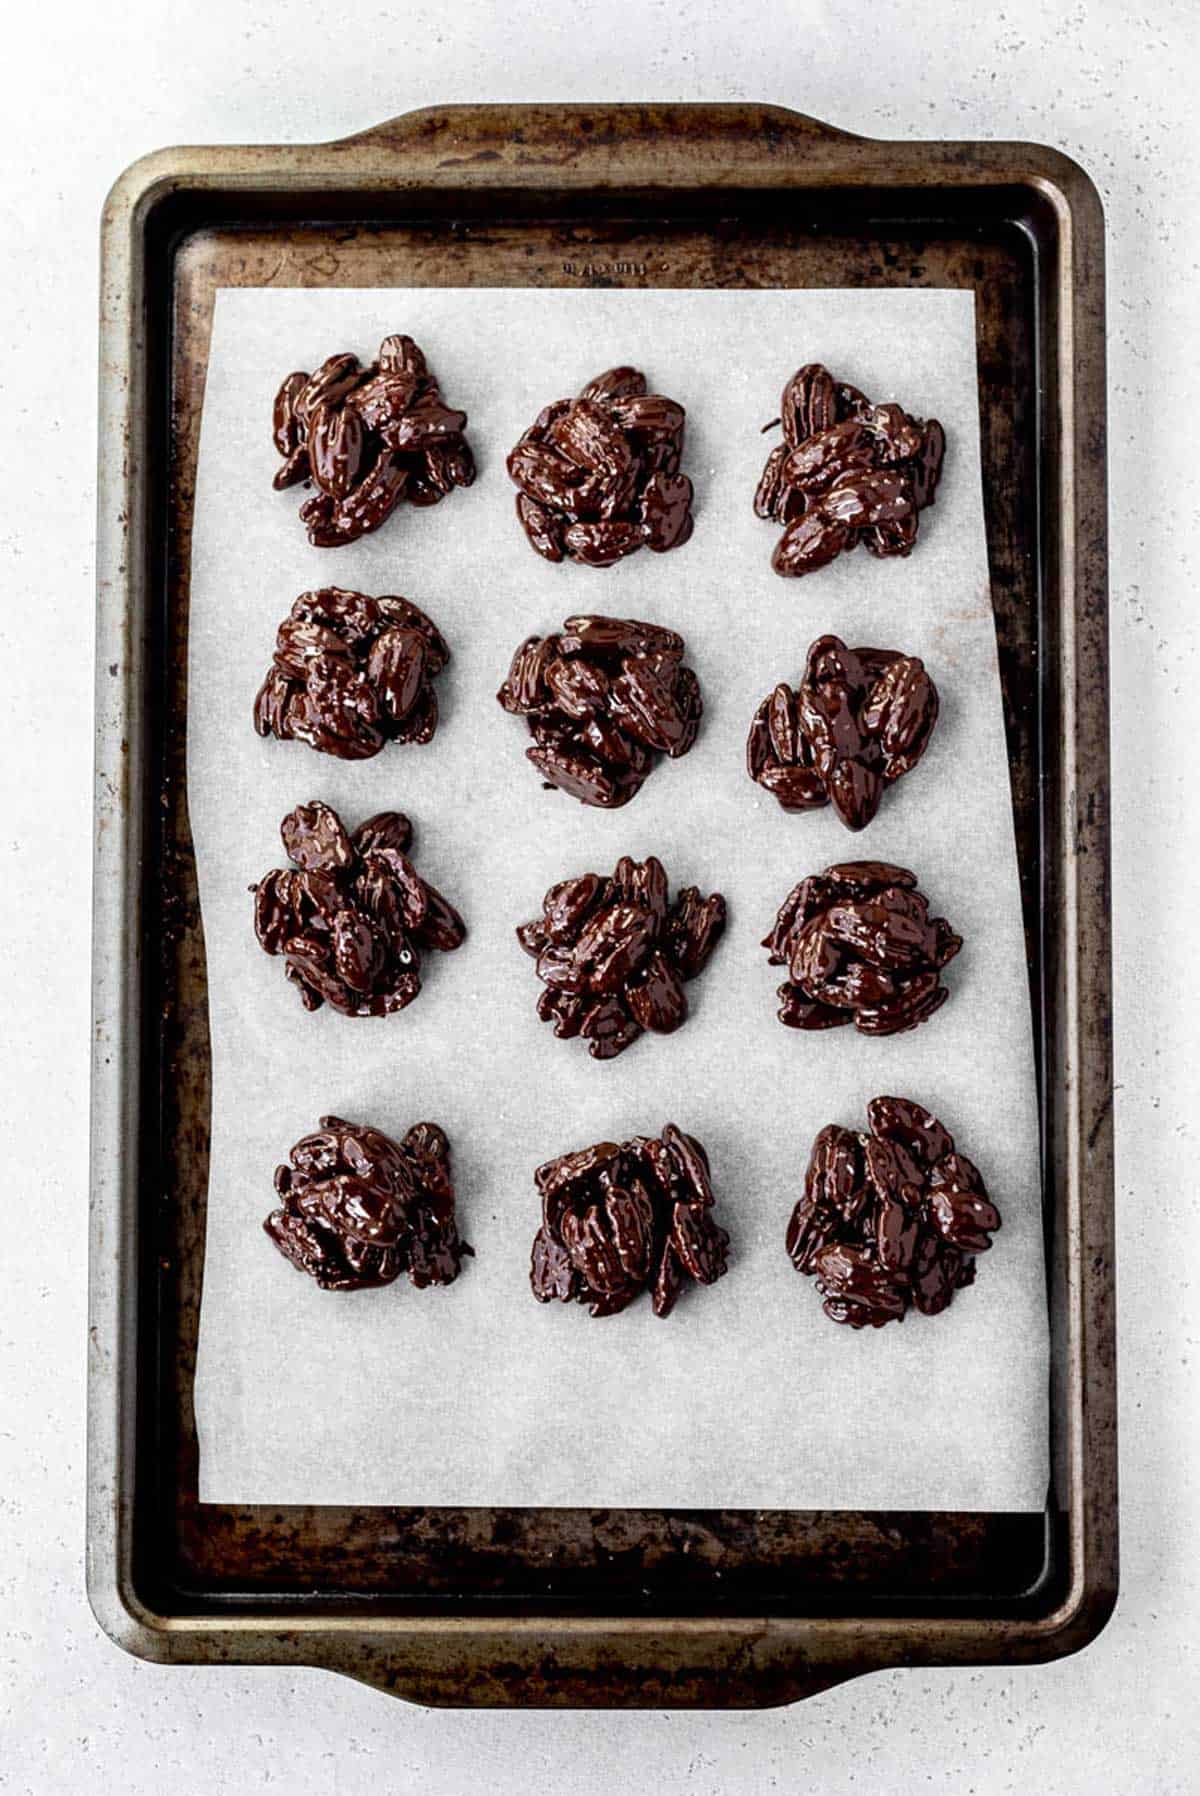 Freshly dipped dark chocolate pecan clusters on a parchment lined baking sheet.